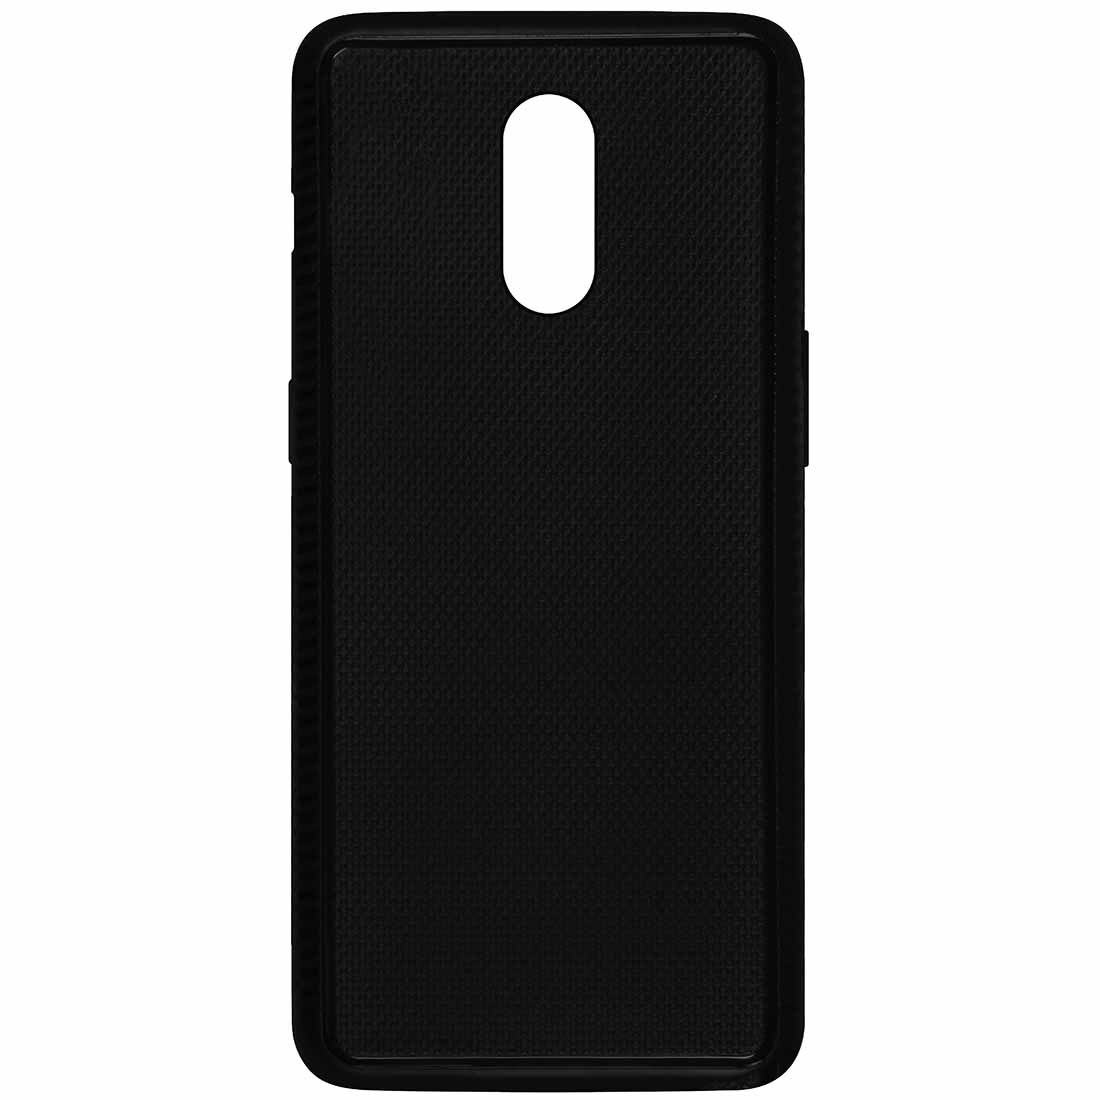 Comfort Grip Back Case Cover for OnePlus 6T